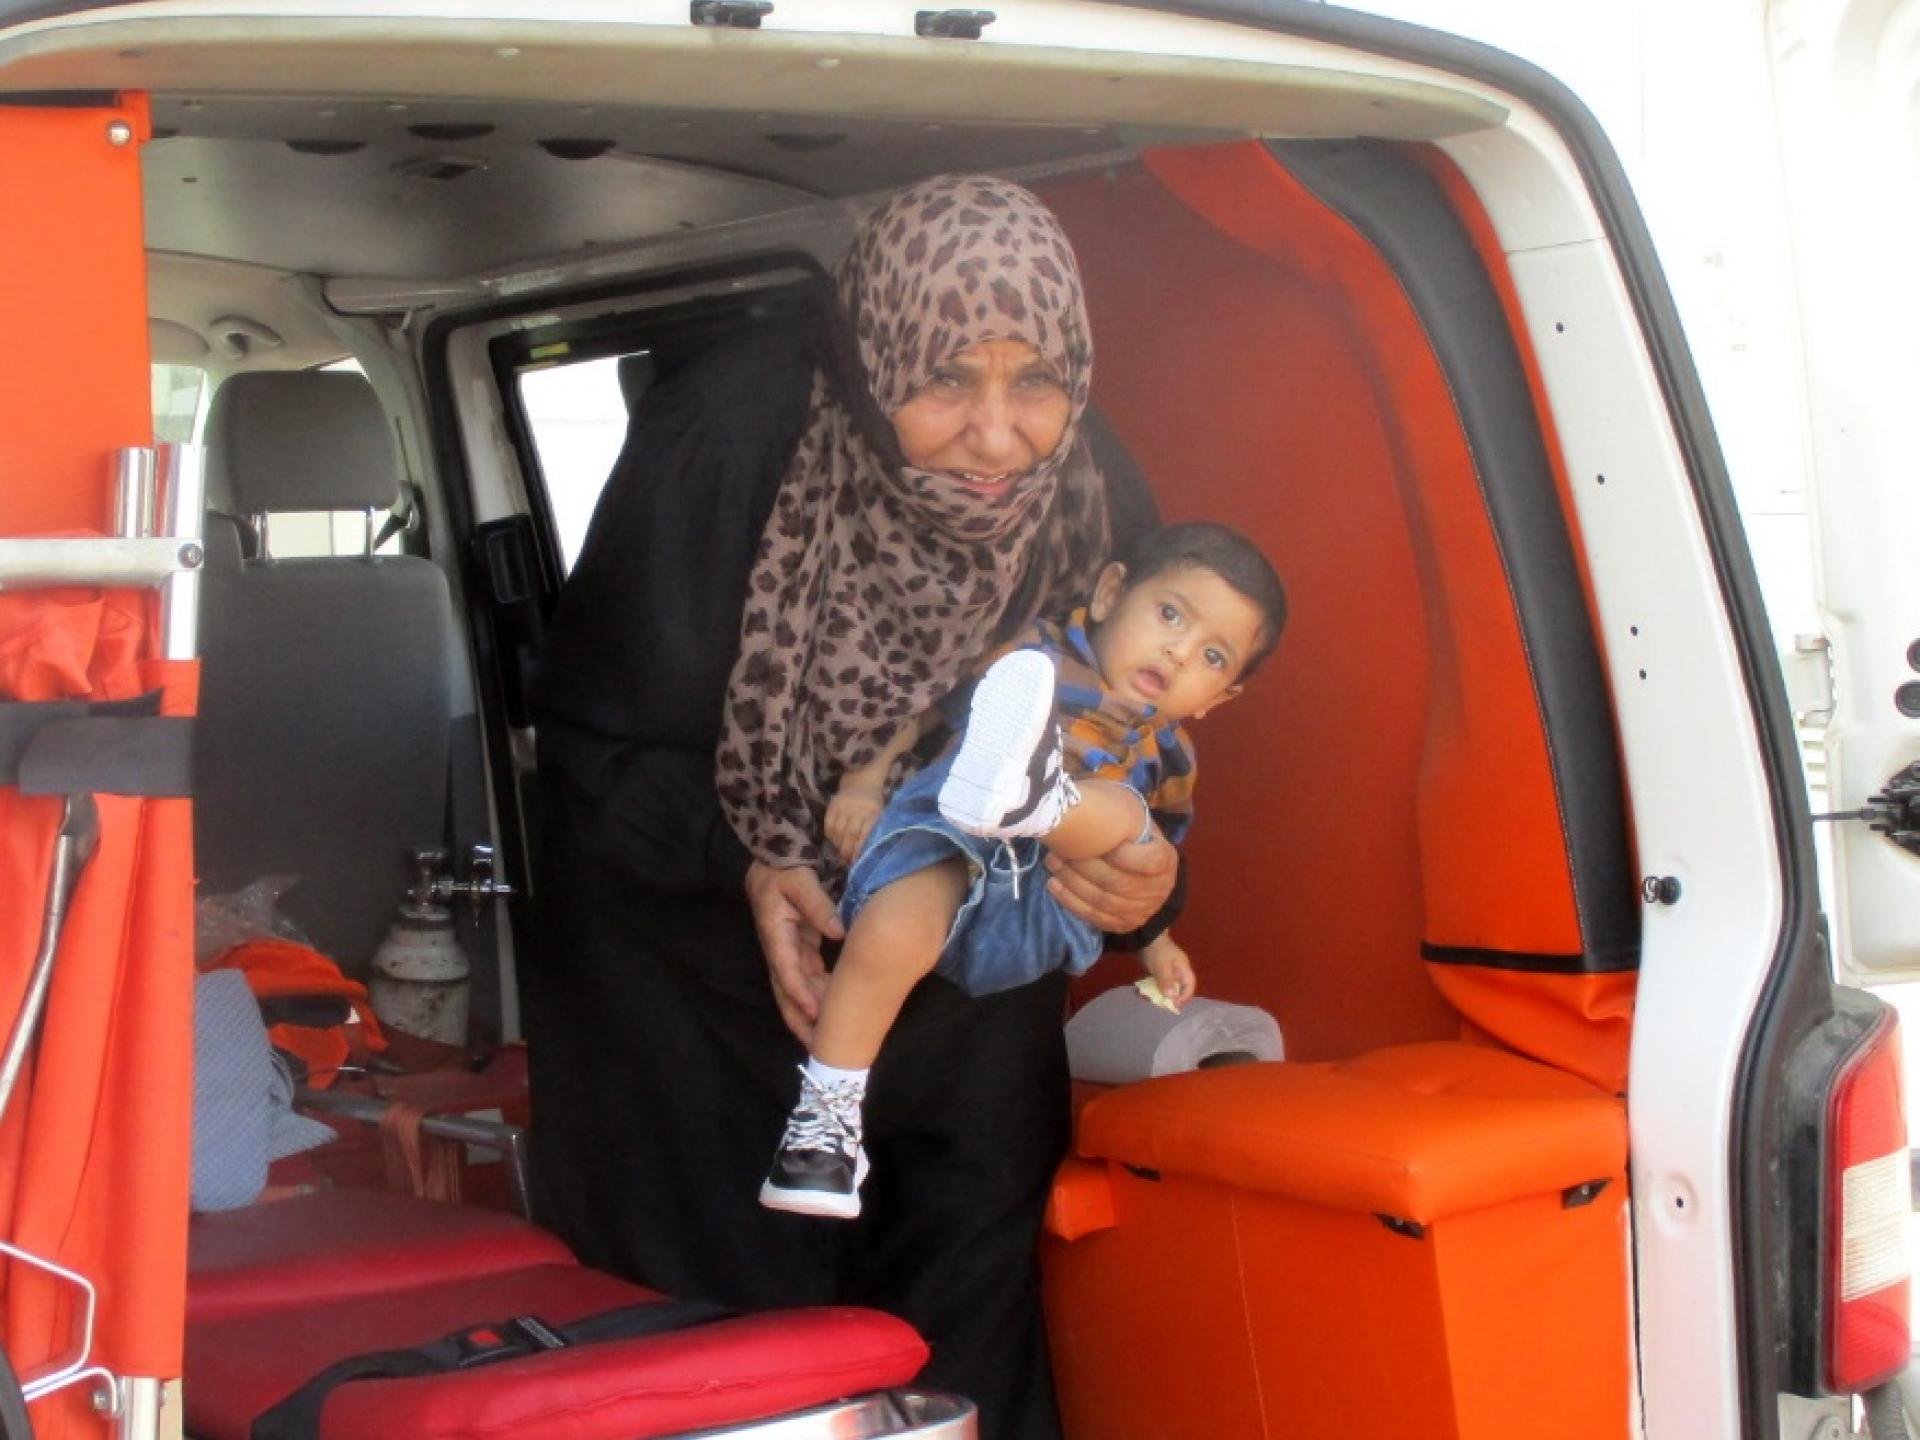 The two-year old child was passed to his mother's arms in the Jerusalem ambulance